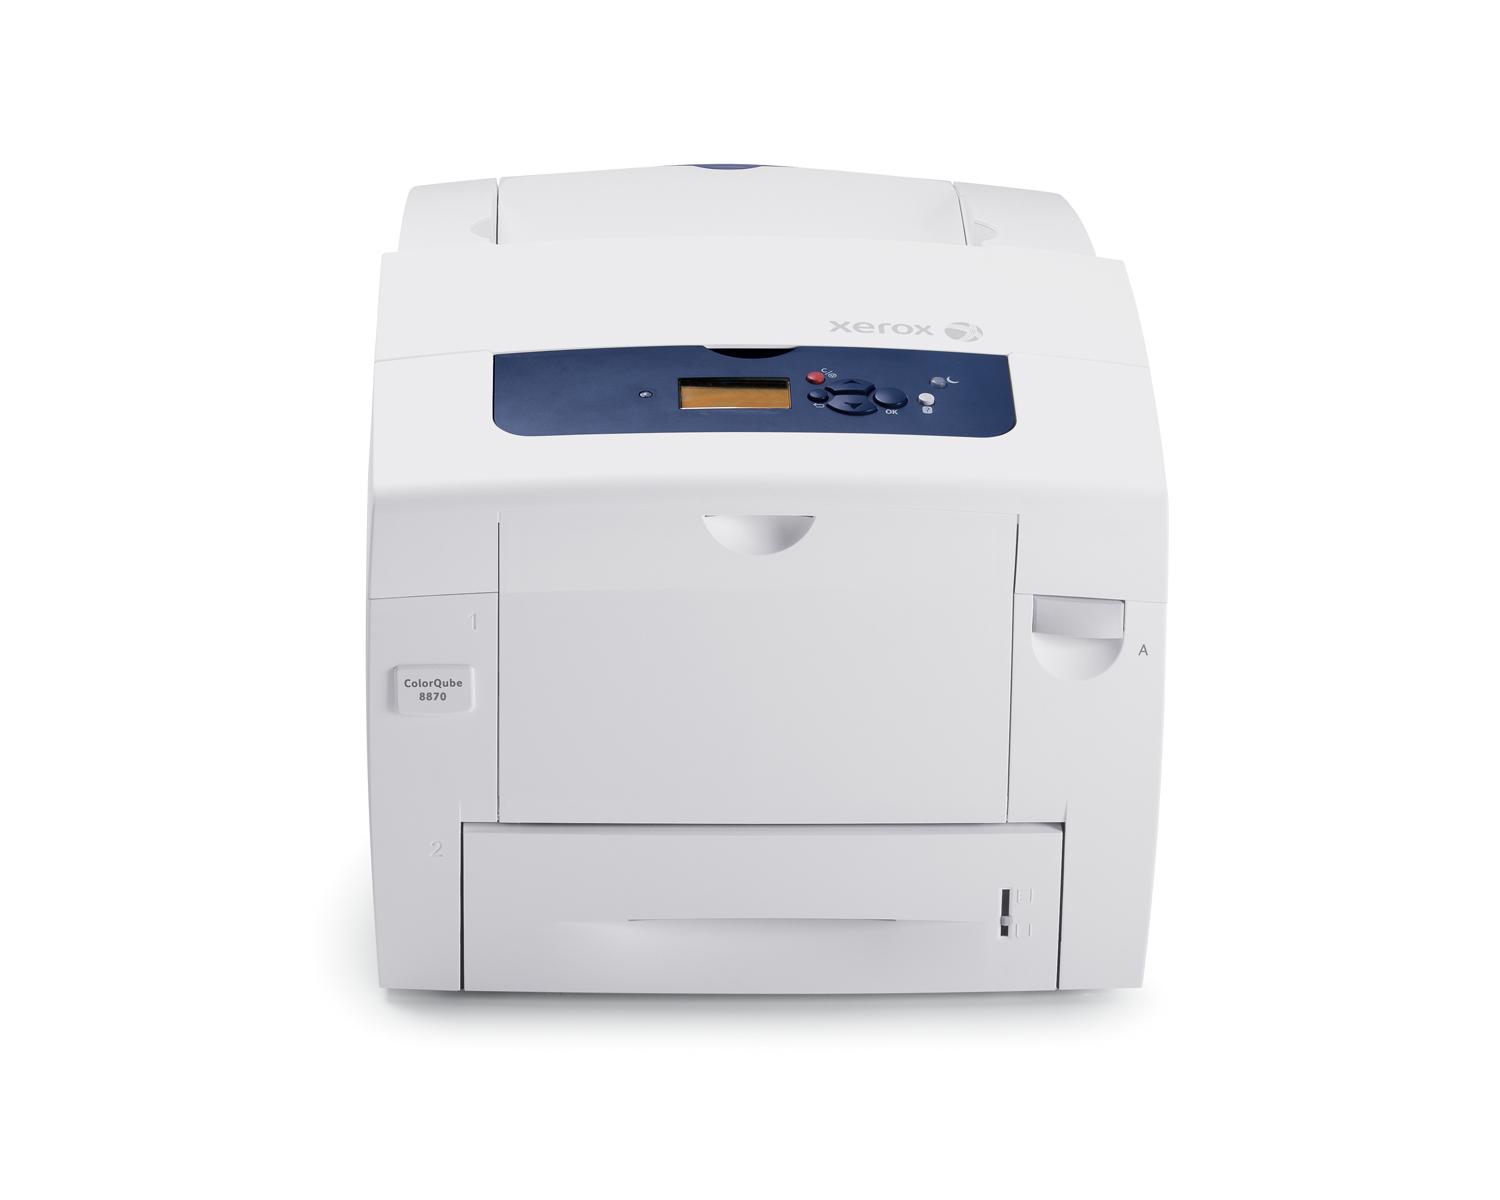 Foto Imp. Laser Color Xerox 8870_adnm pagepack [8870_ADNM] [0095205762303]